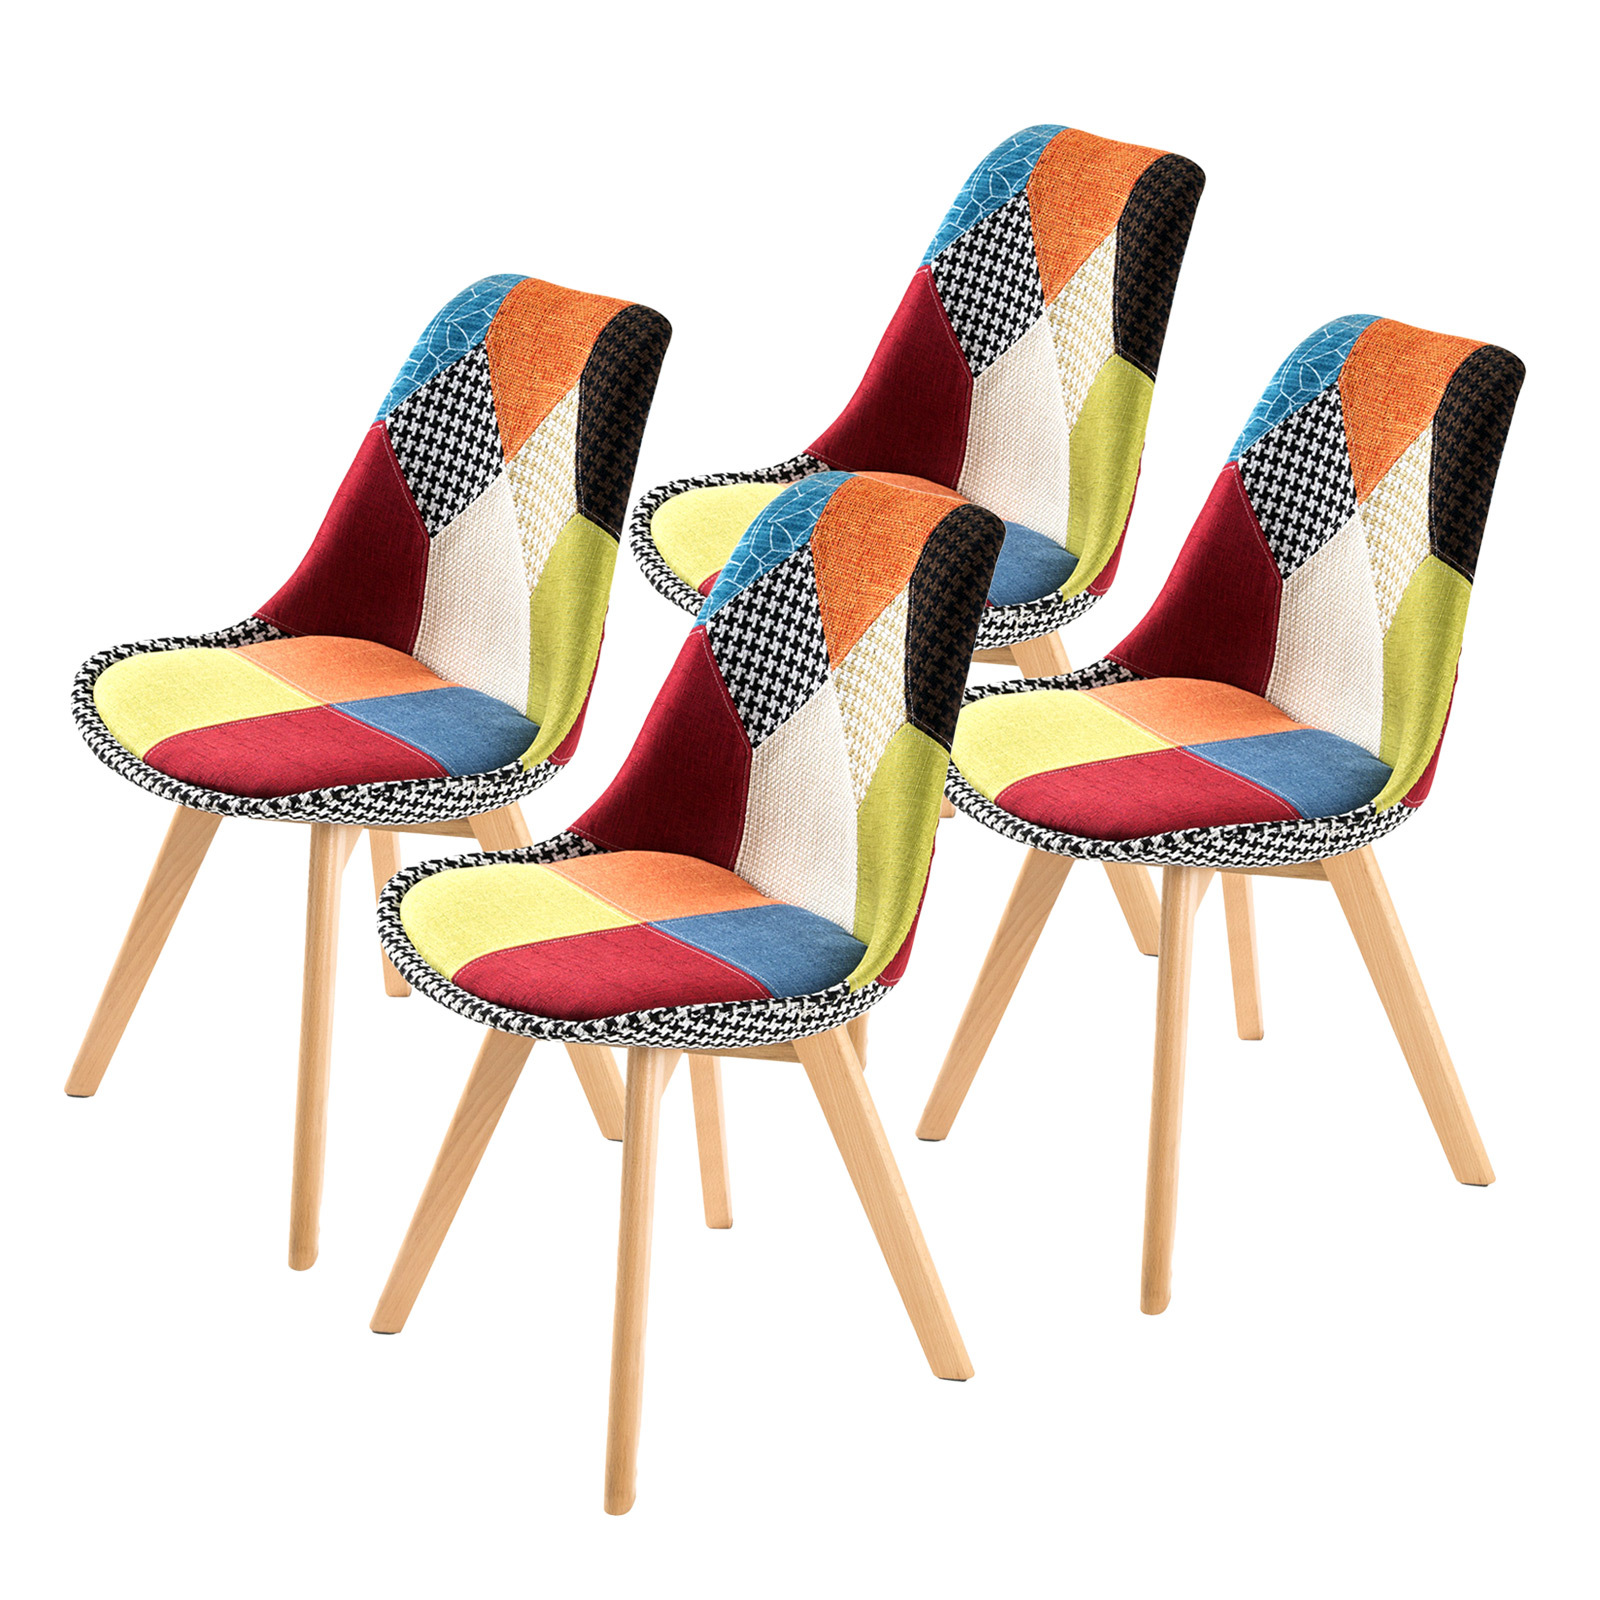 4X Padded Seat Dining Chair Fabric - MULTI